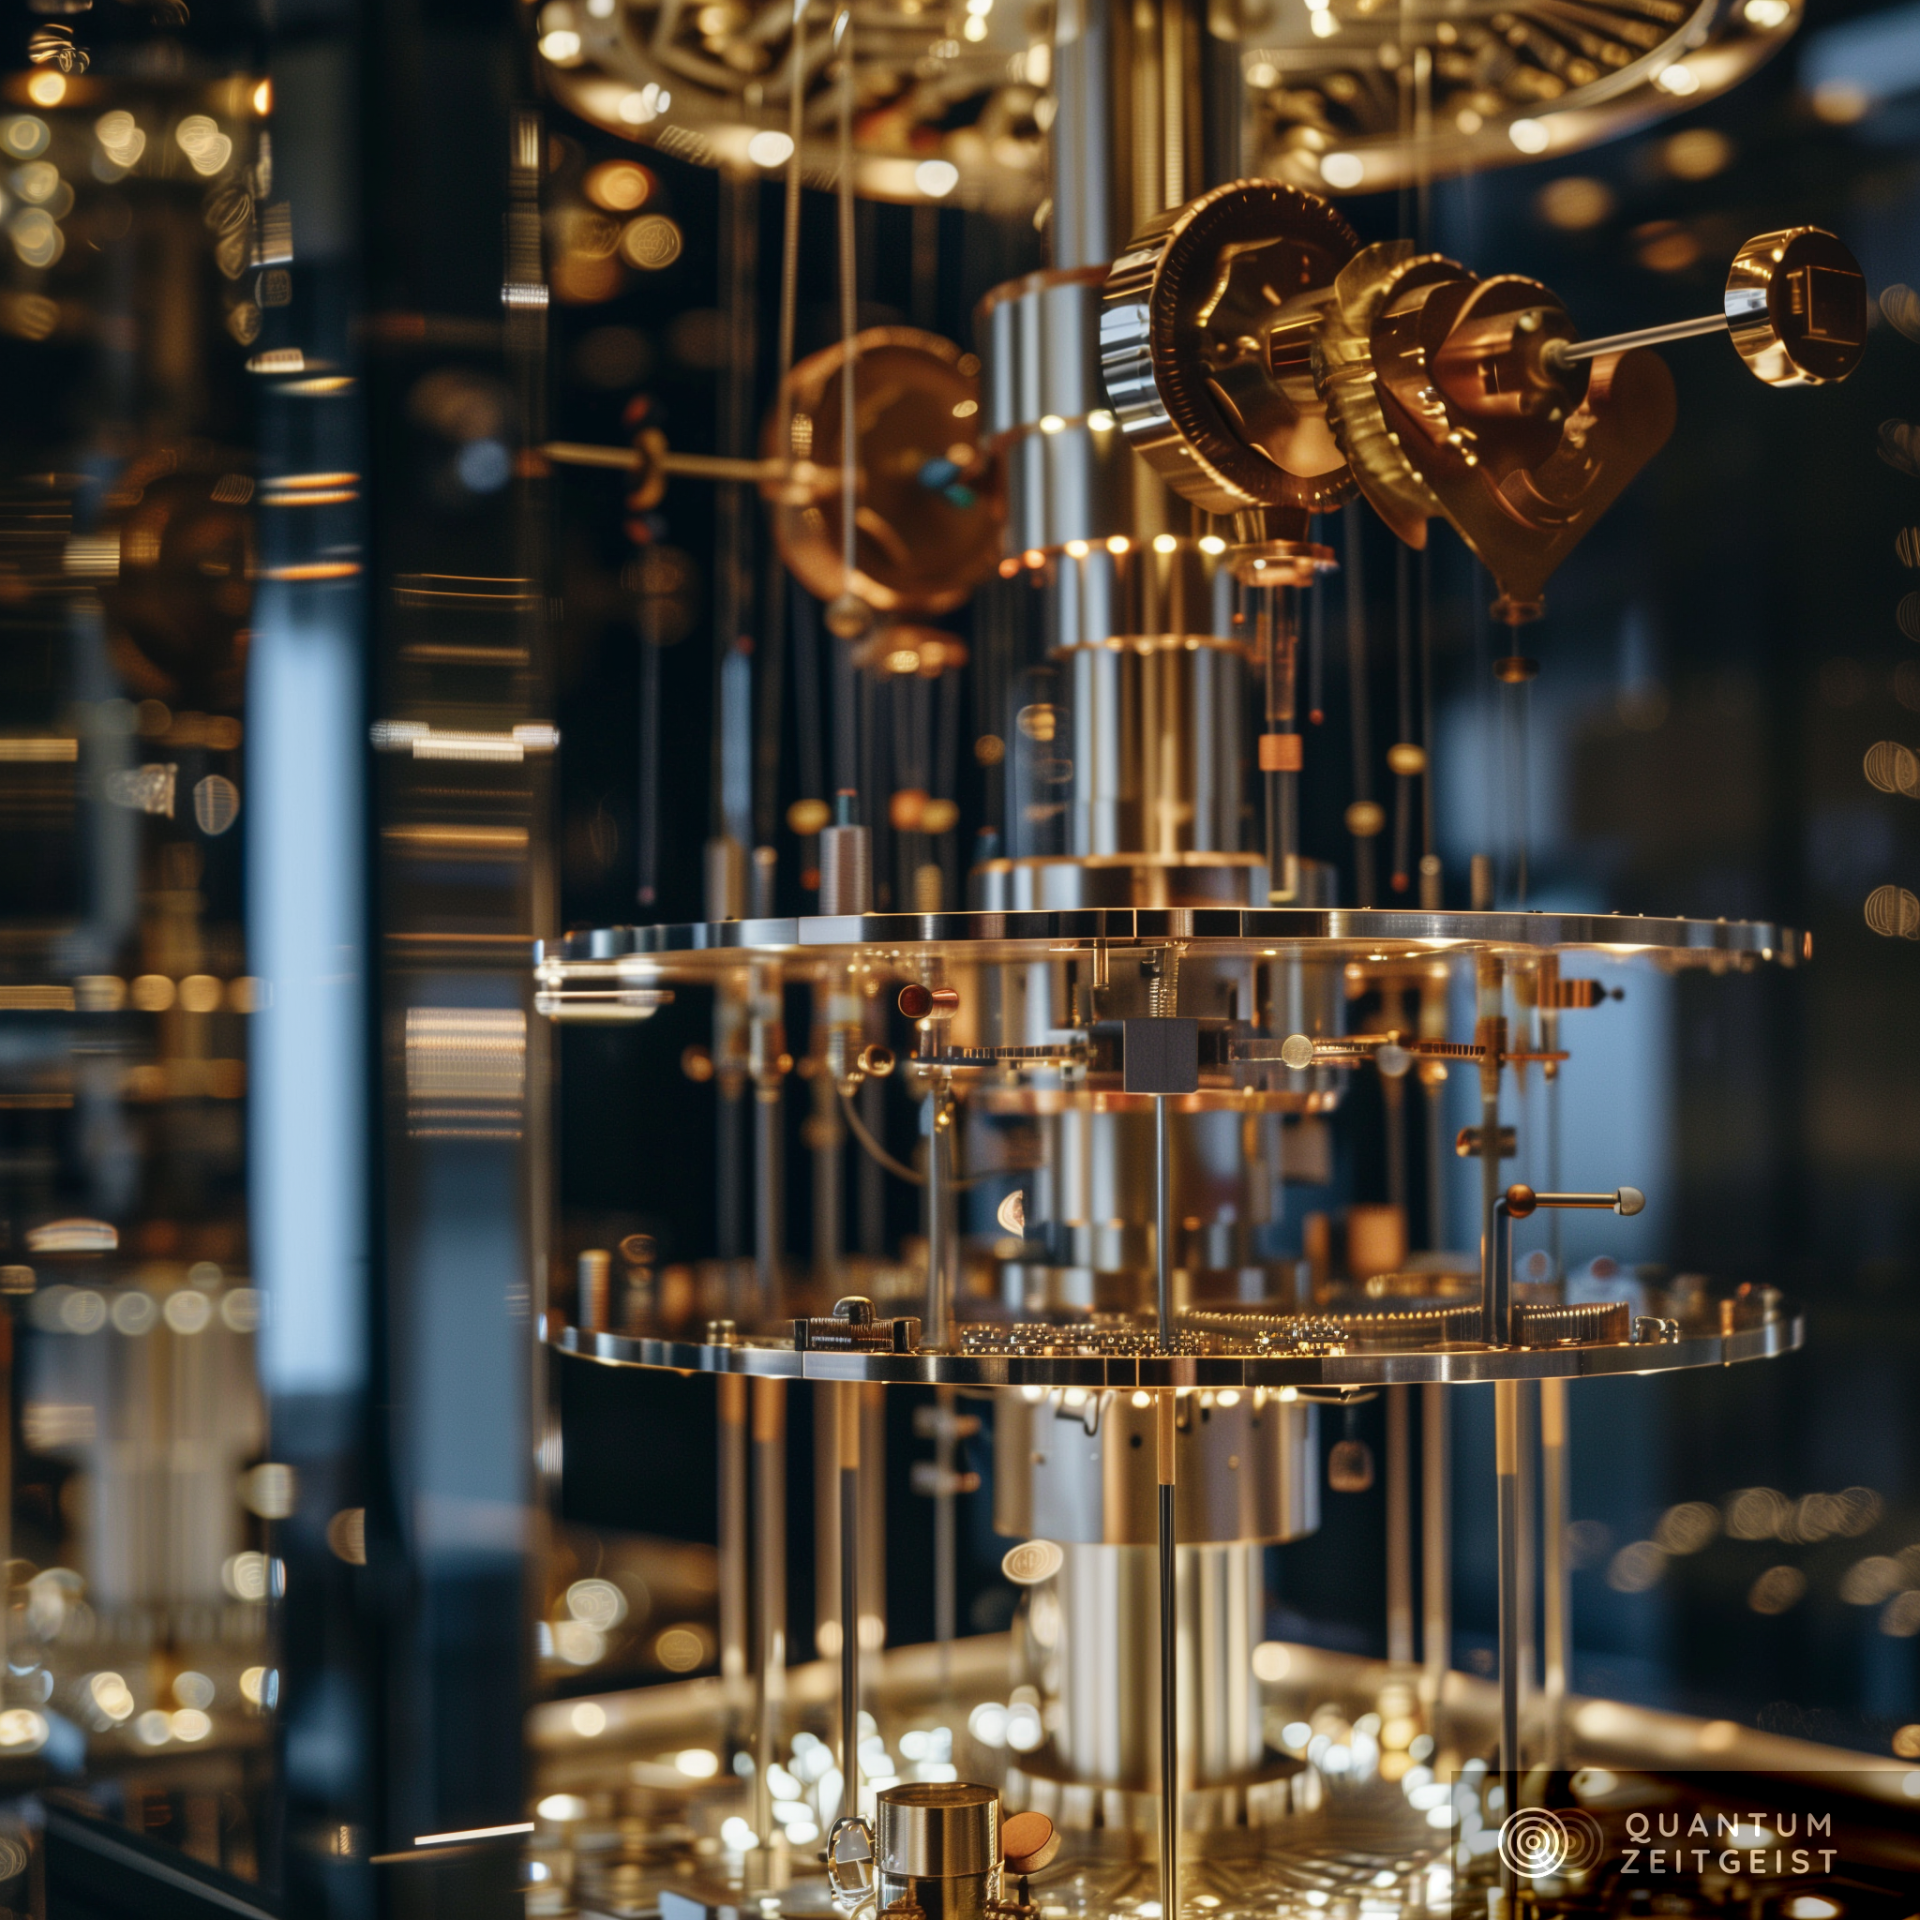 Quantum Machine Learning Challenges Traditional Understanding Of Data Generalization